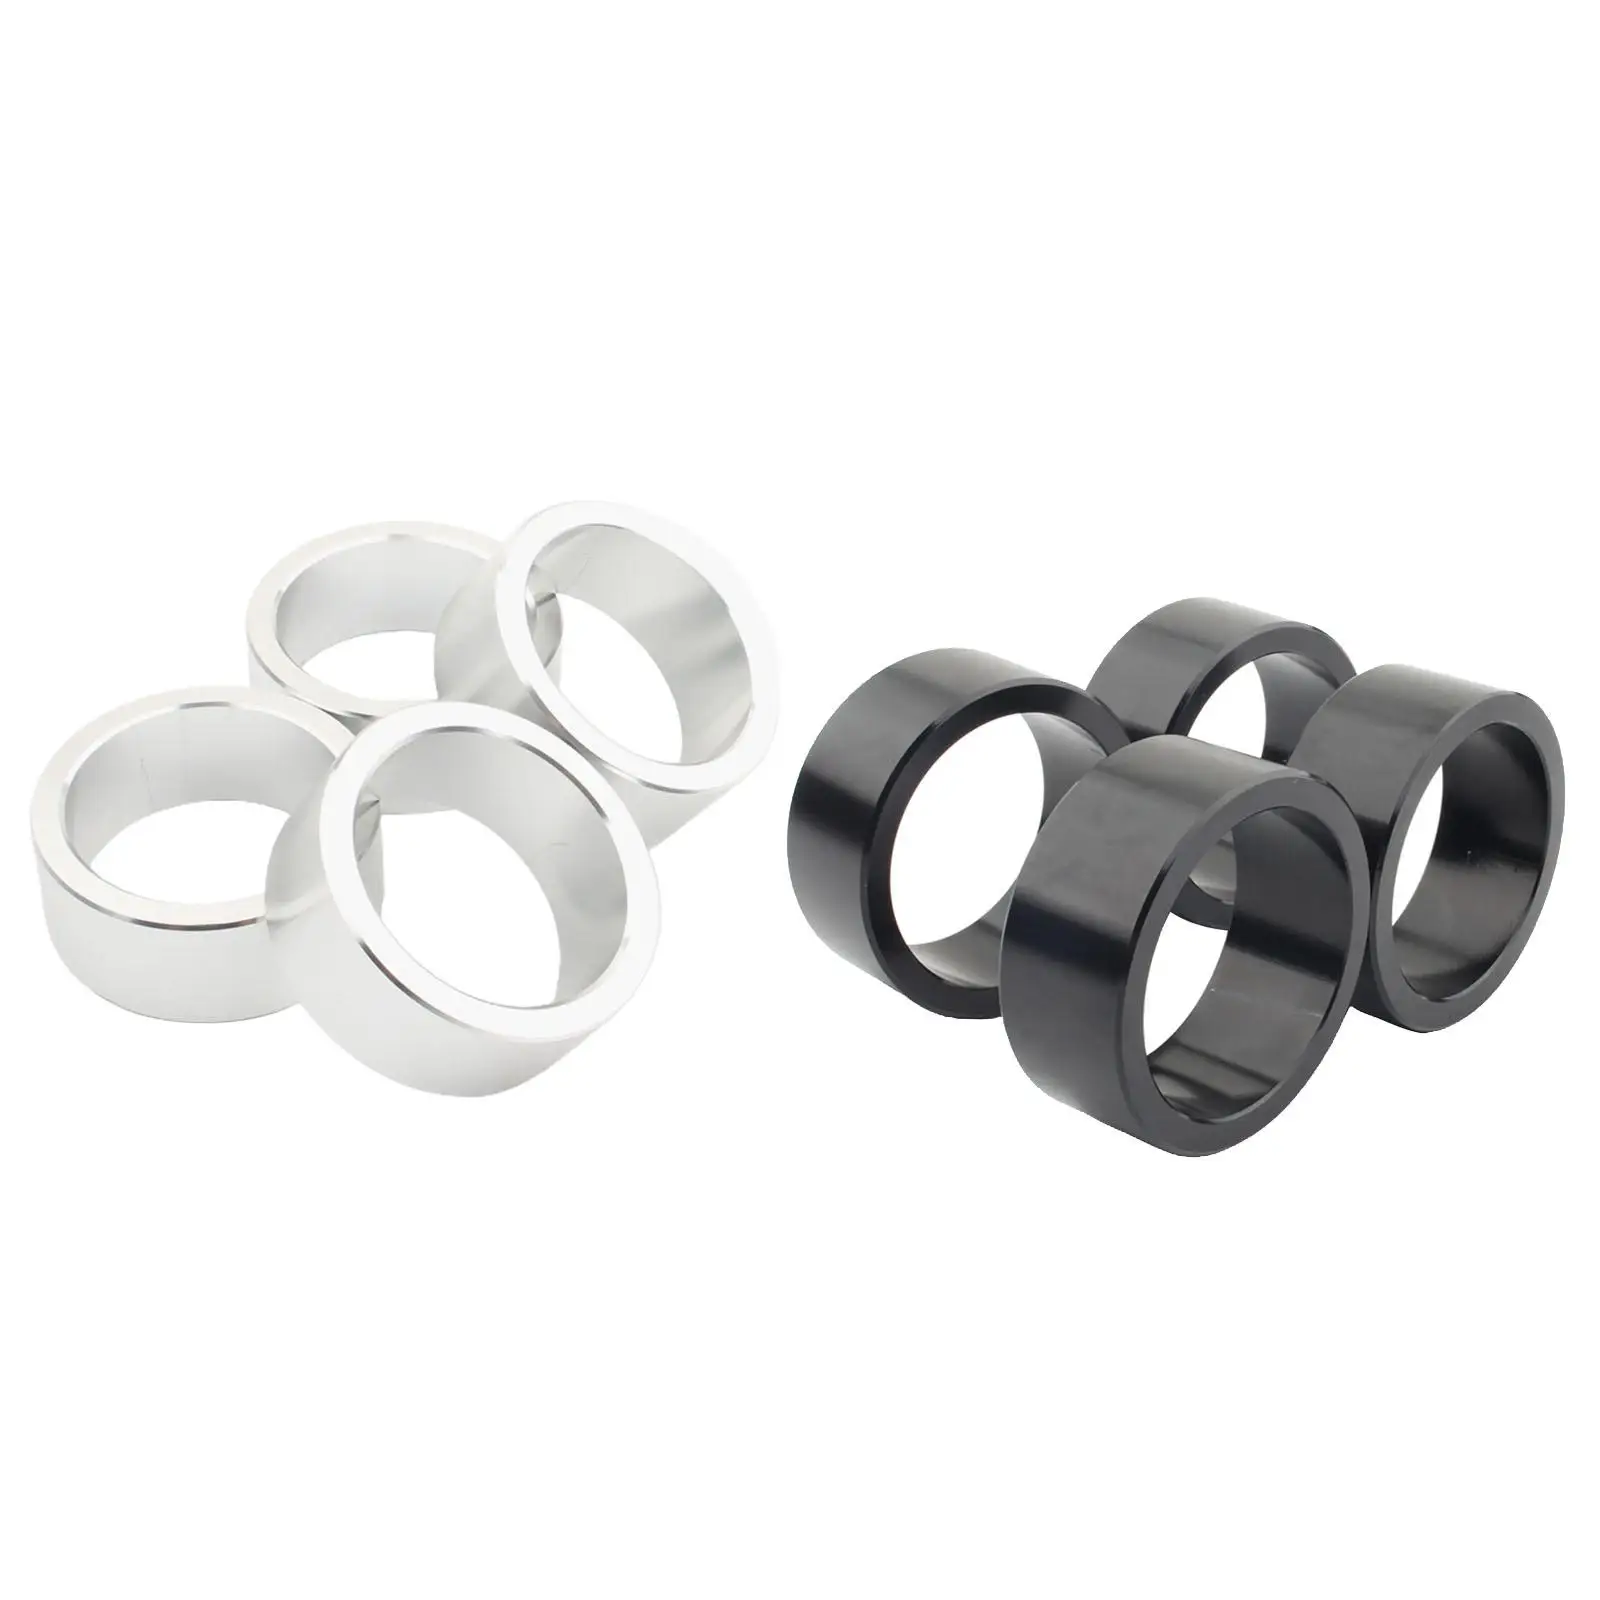 Aluminum Alloy Lift Spacers 2.5 Inch*4,Front  Spacer Kit for  Rancher 230 250 300 350 400 420